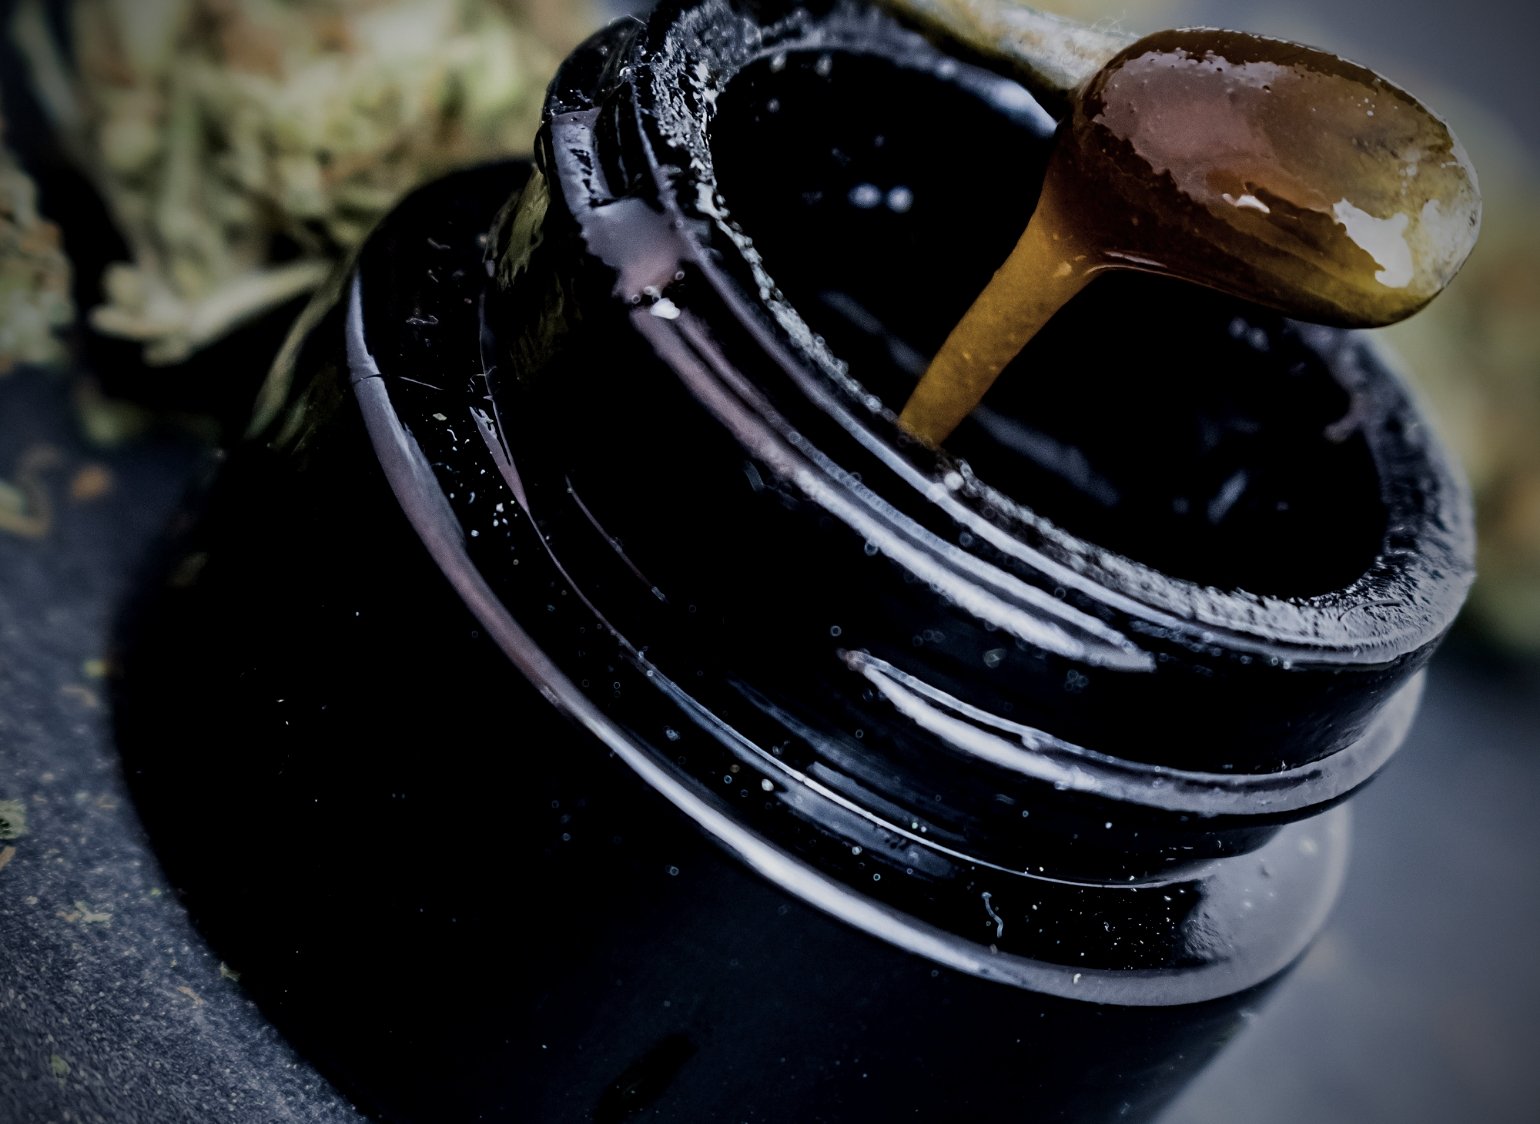 Extracts, a popular form of cannabis concentrate, are created through various extraction methods to isolate and concentrate cannabinoids and terpenes from the cannabis plant.